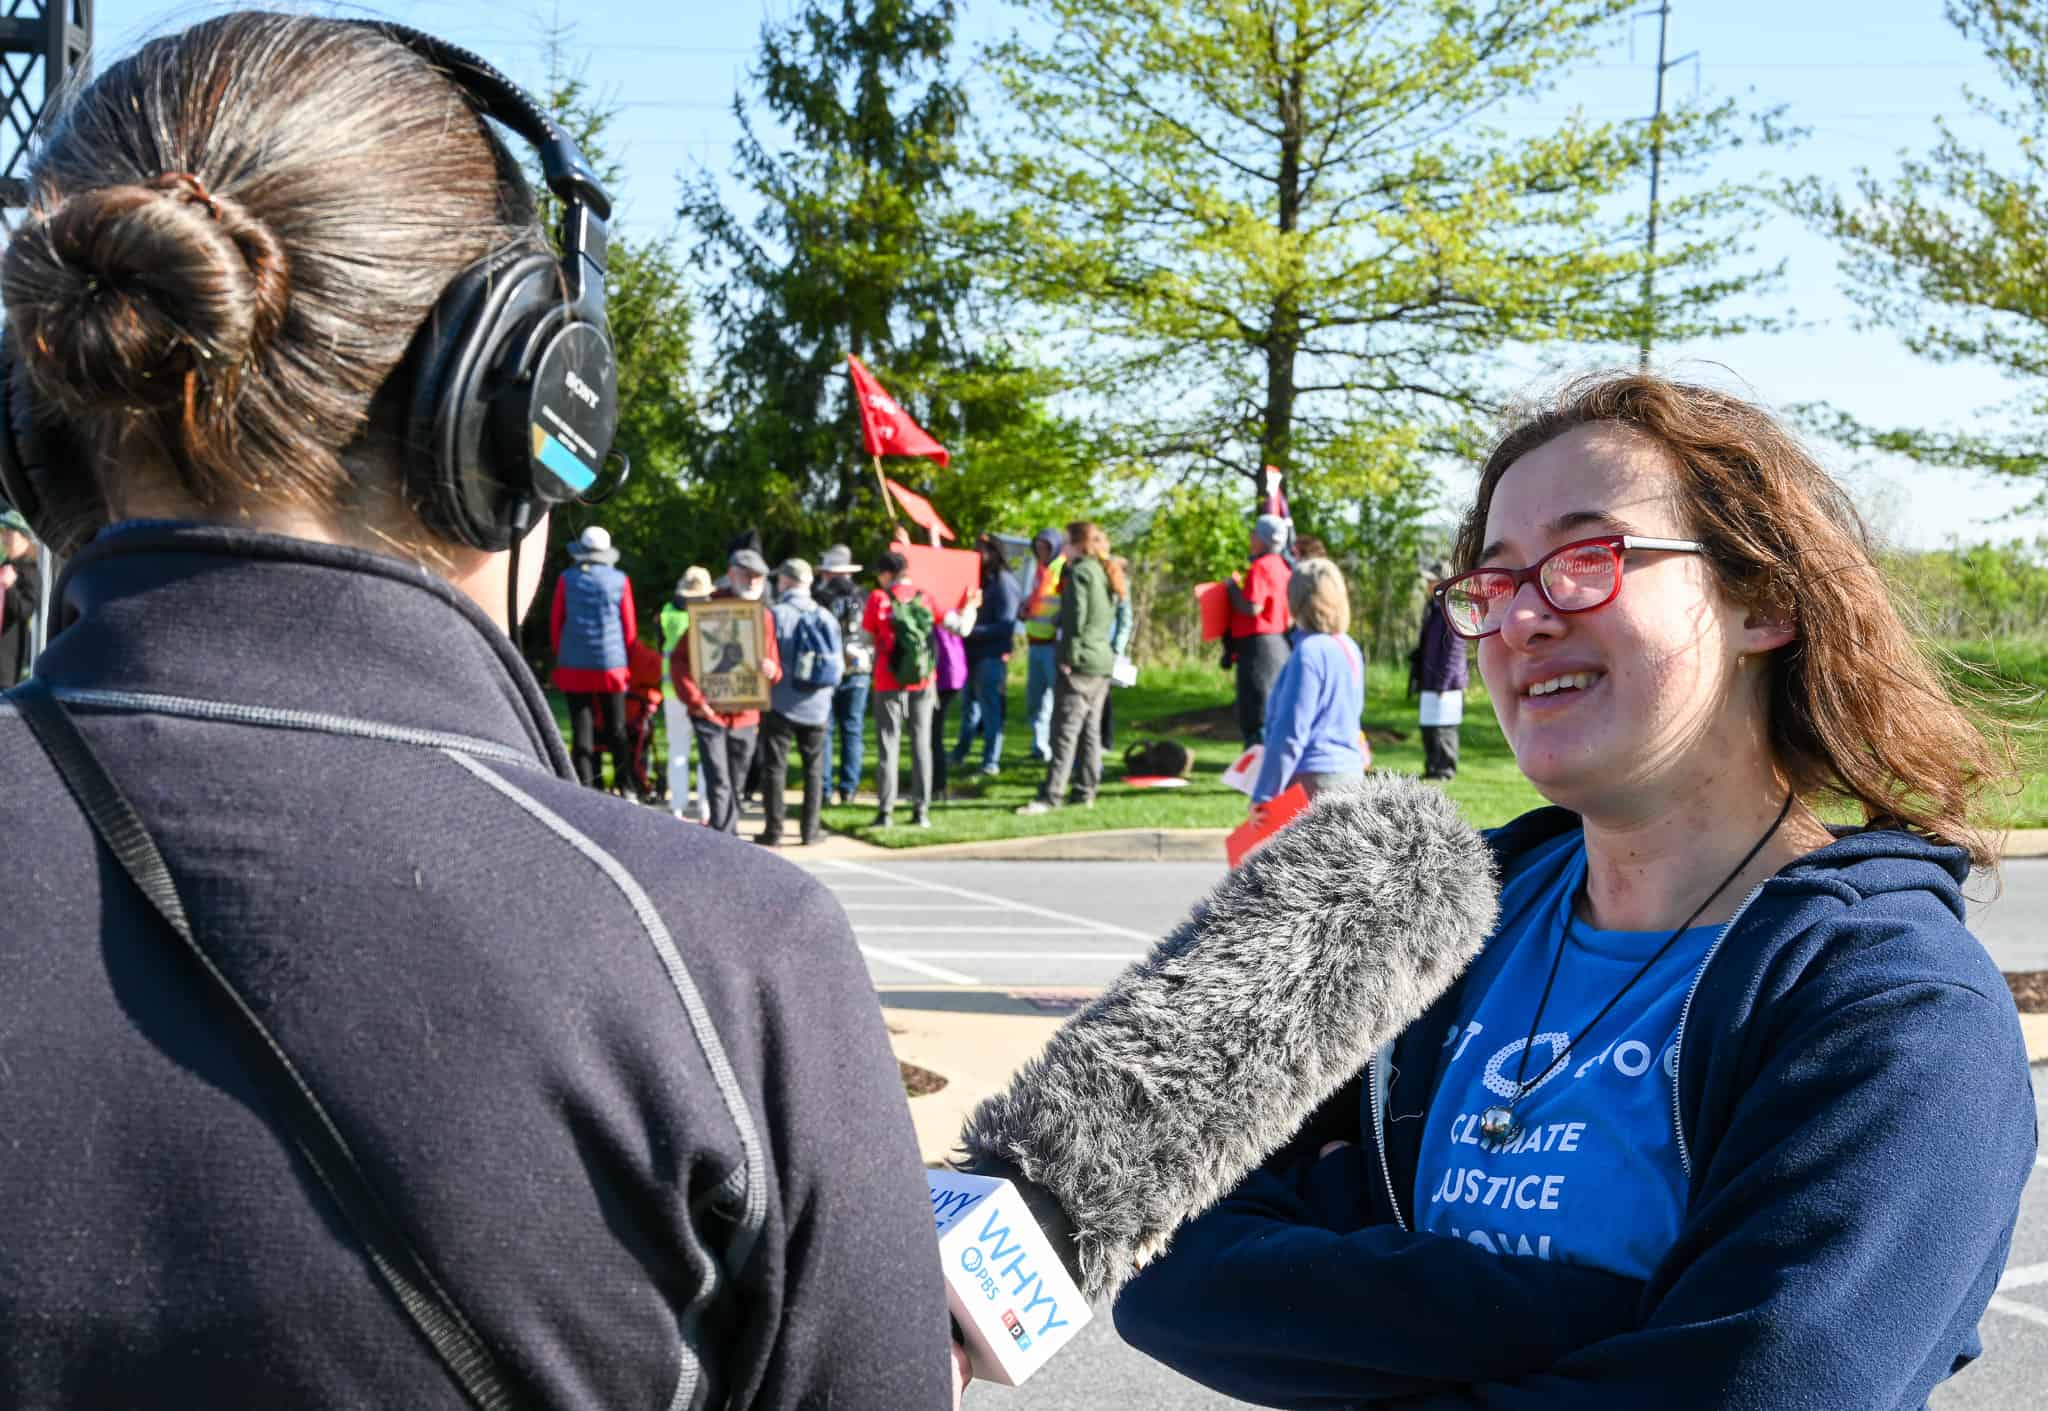 A person wearing glasses and a blue t-shirt speaks into a large microphone held by another person whose back is to the camera. In the distance, there's a crowd of people, some of which are holding signs or flags. 